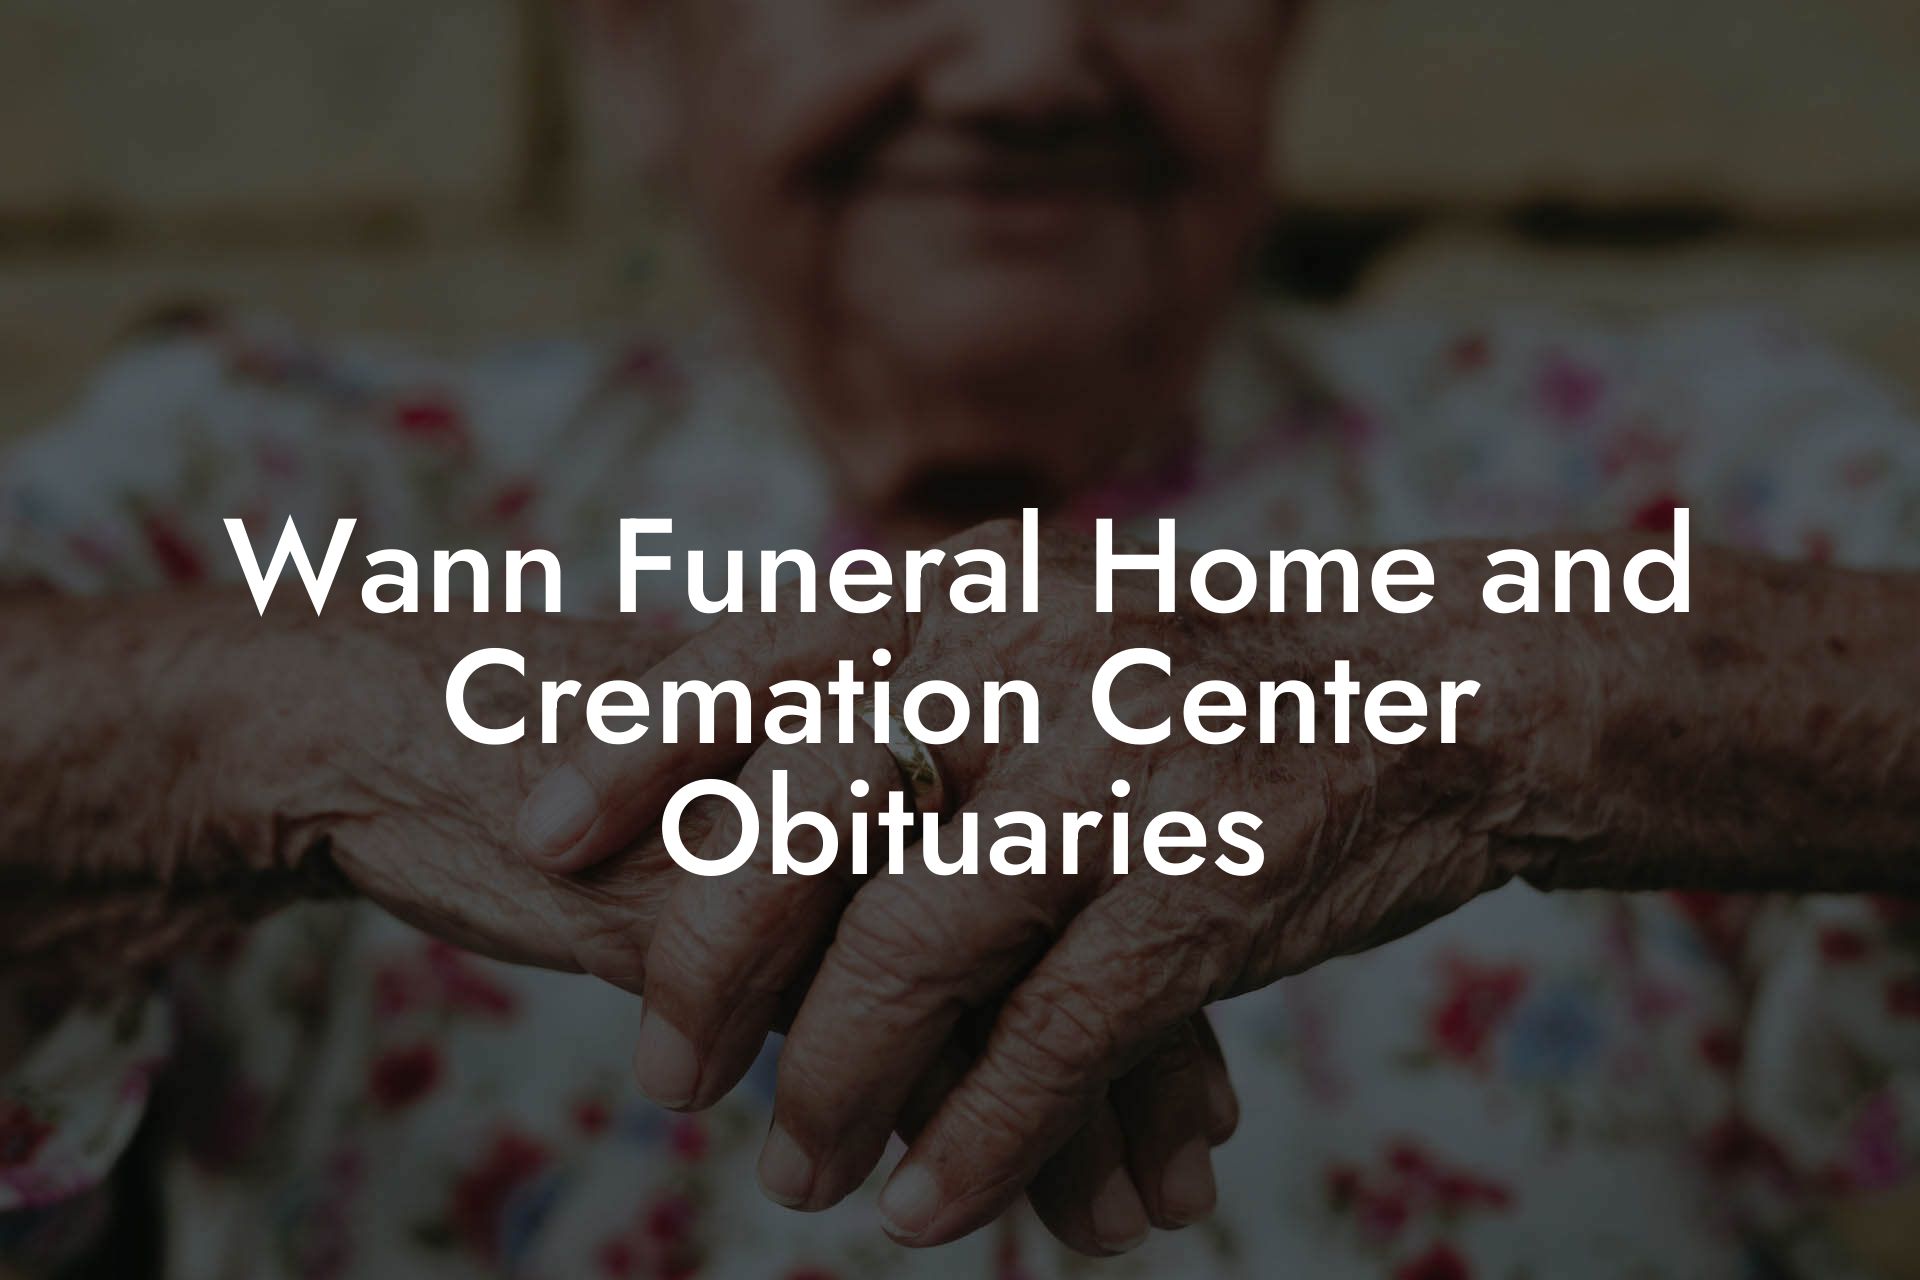 Wann Funeral Home and Cremation Center Obituaries